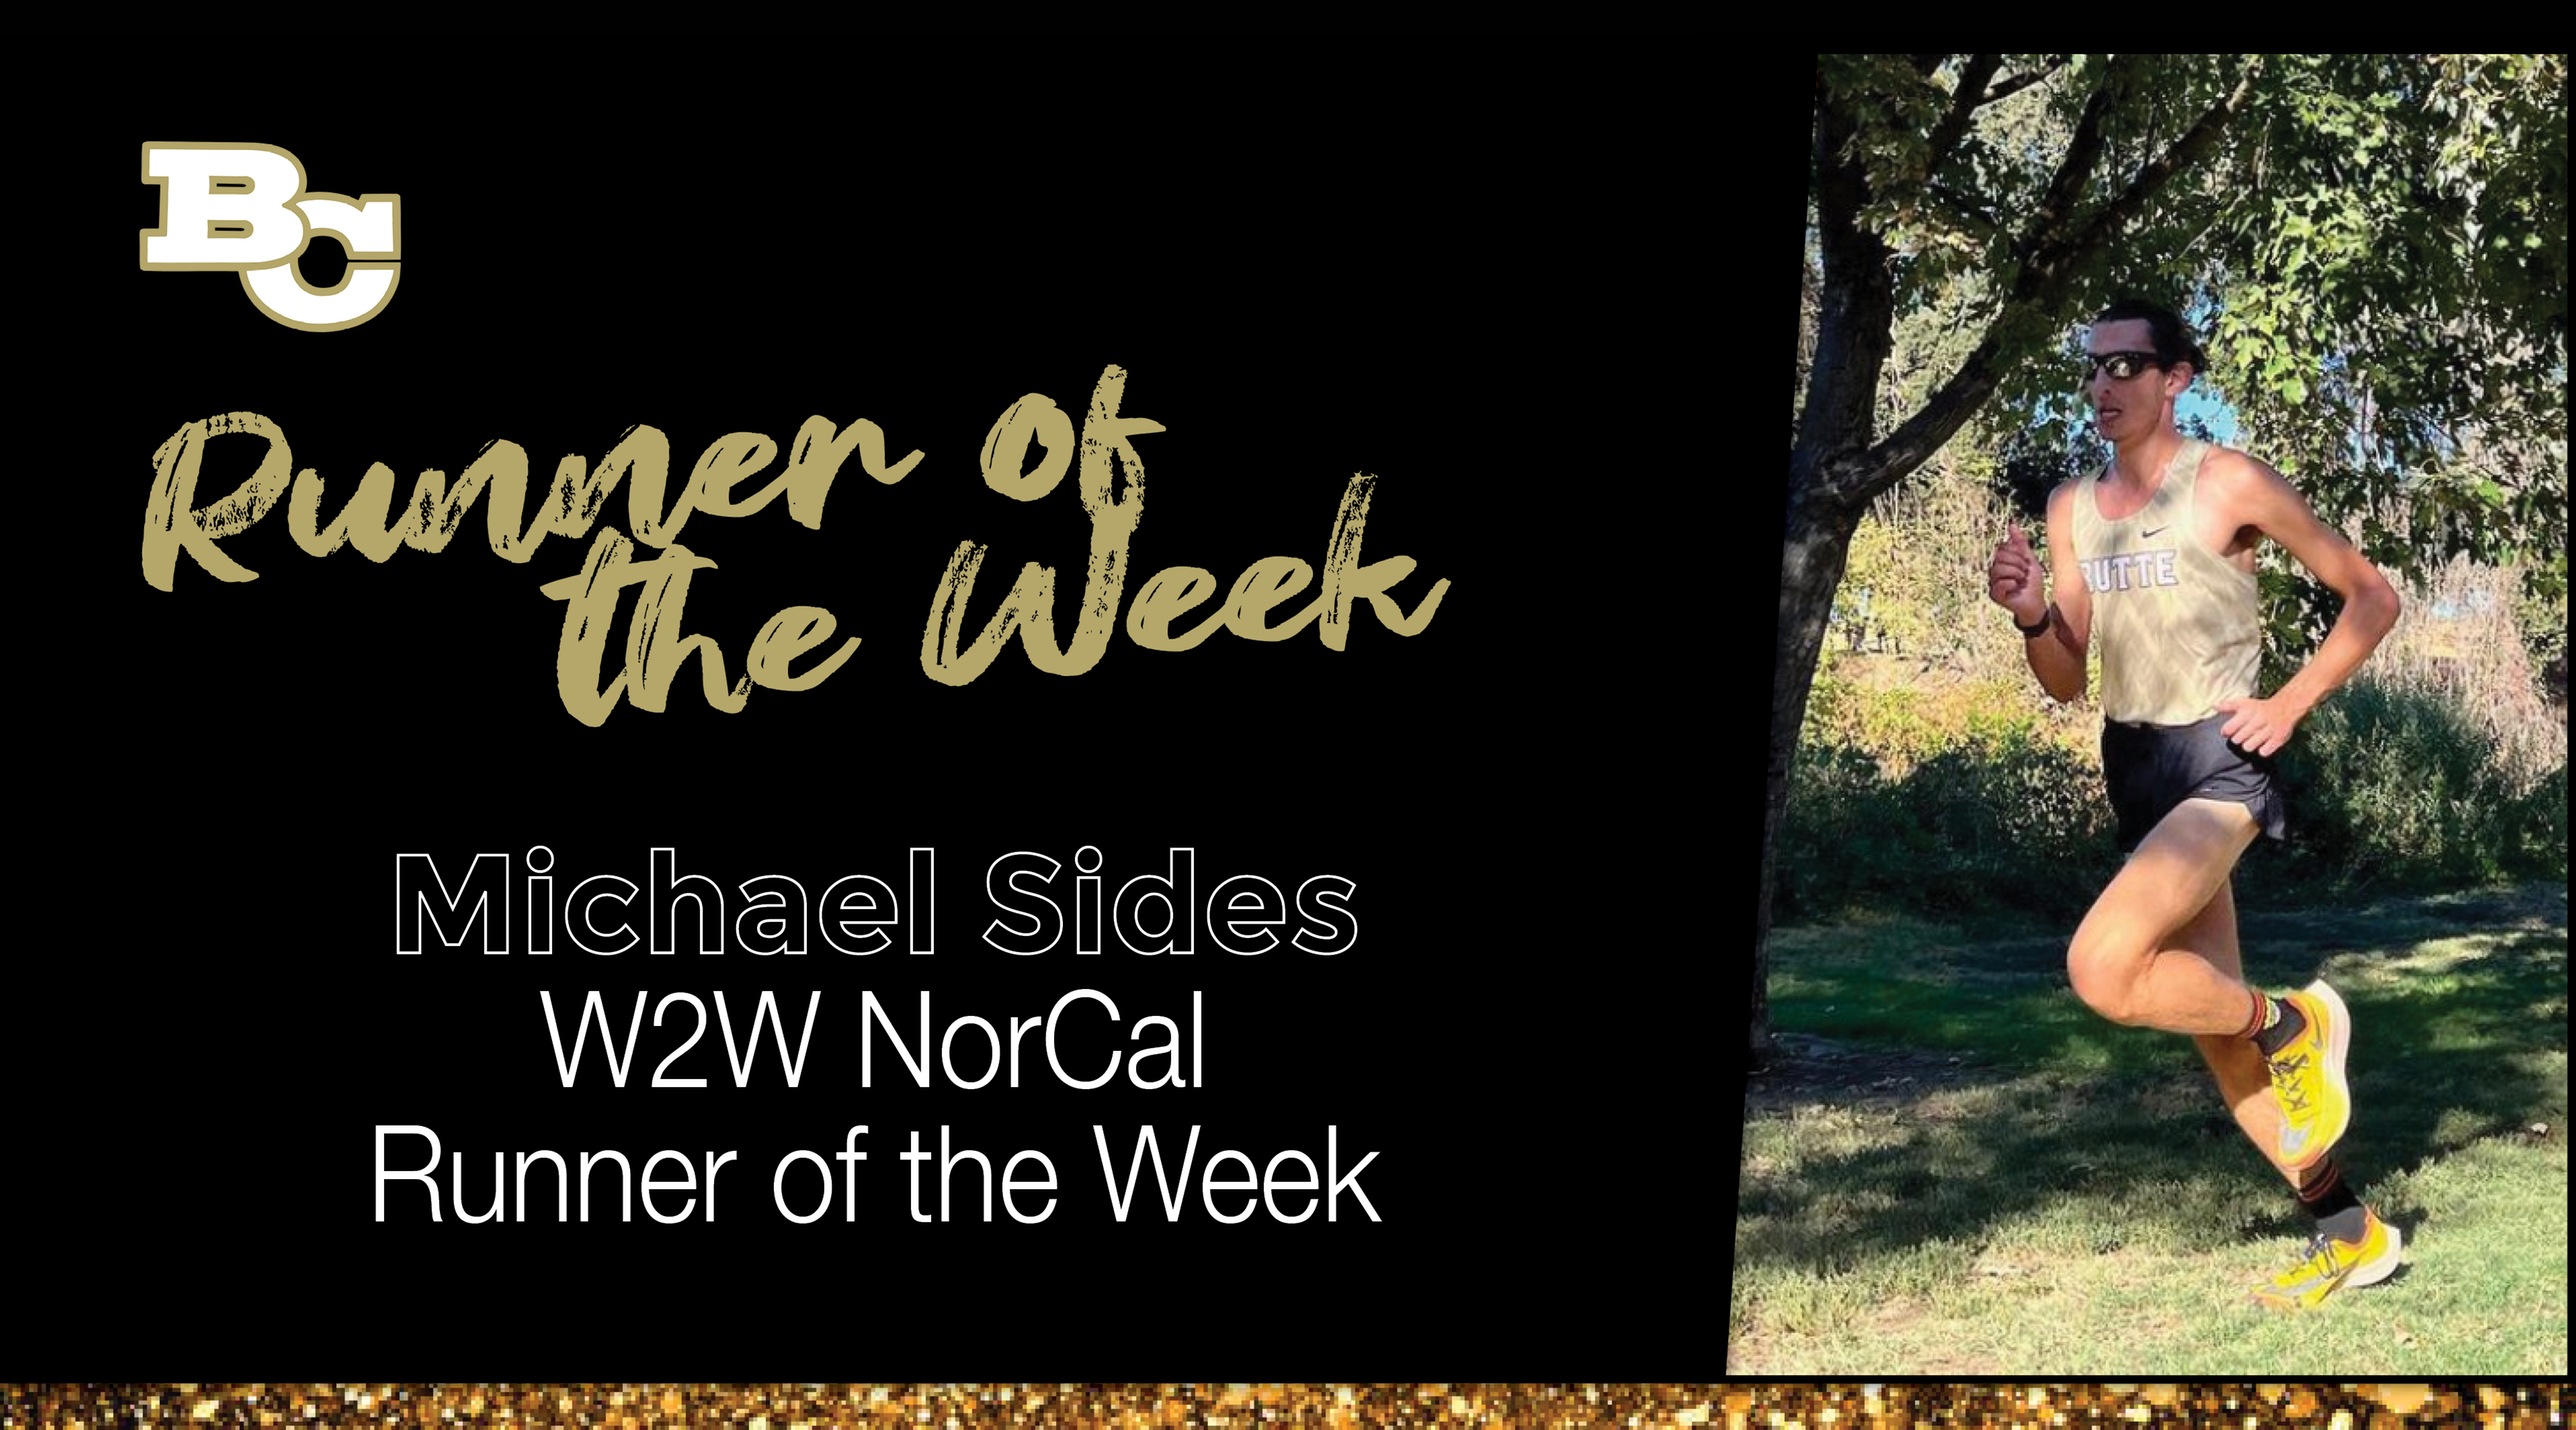 Sides Tabbed W2W NorCal Runner of the Week